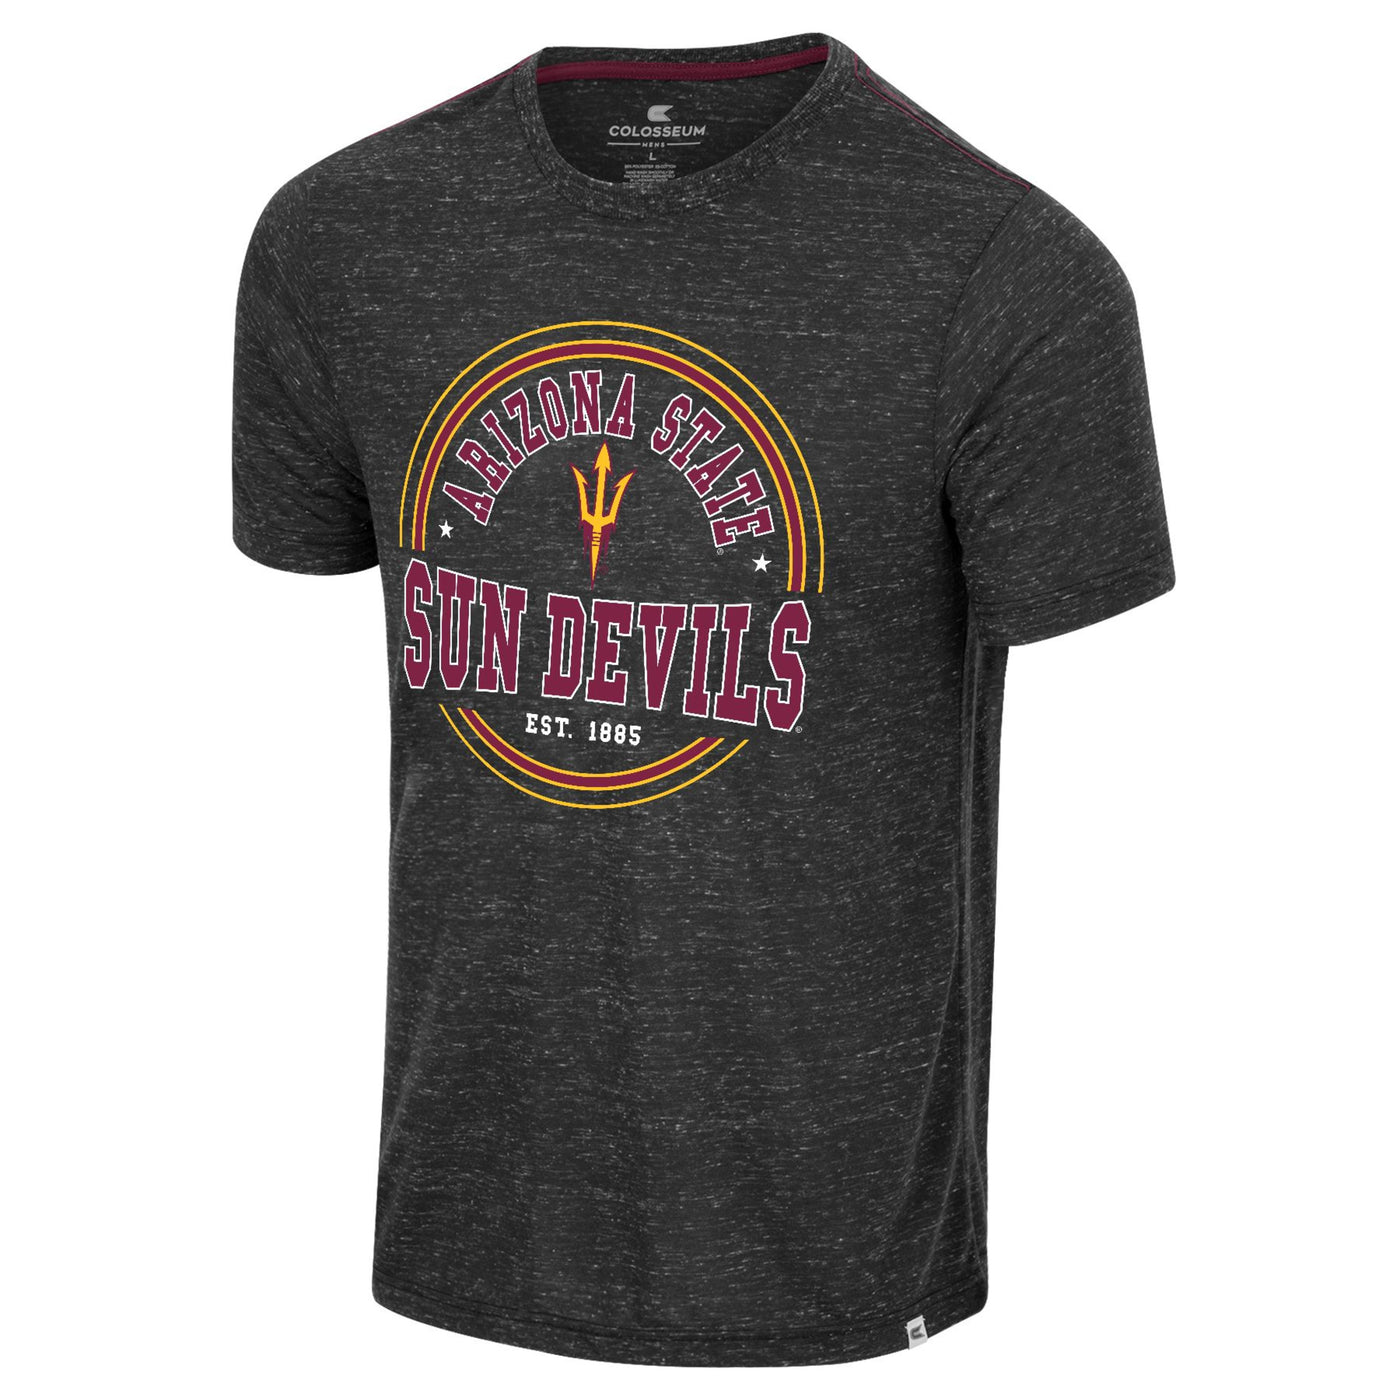 ASU Heather grey shirt with circle details in maroon and gold on the chest. Arched in the circle and over a pitchfork logo is  